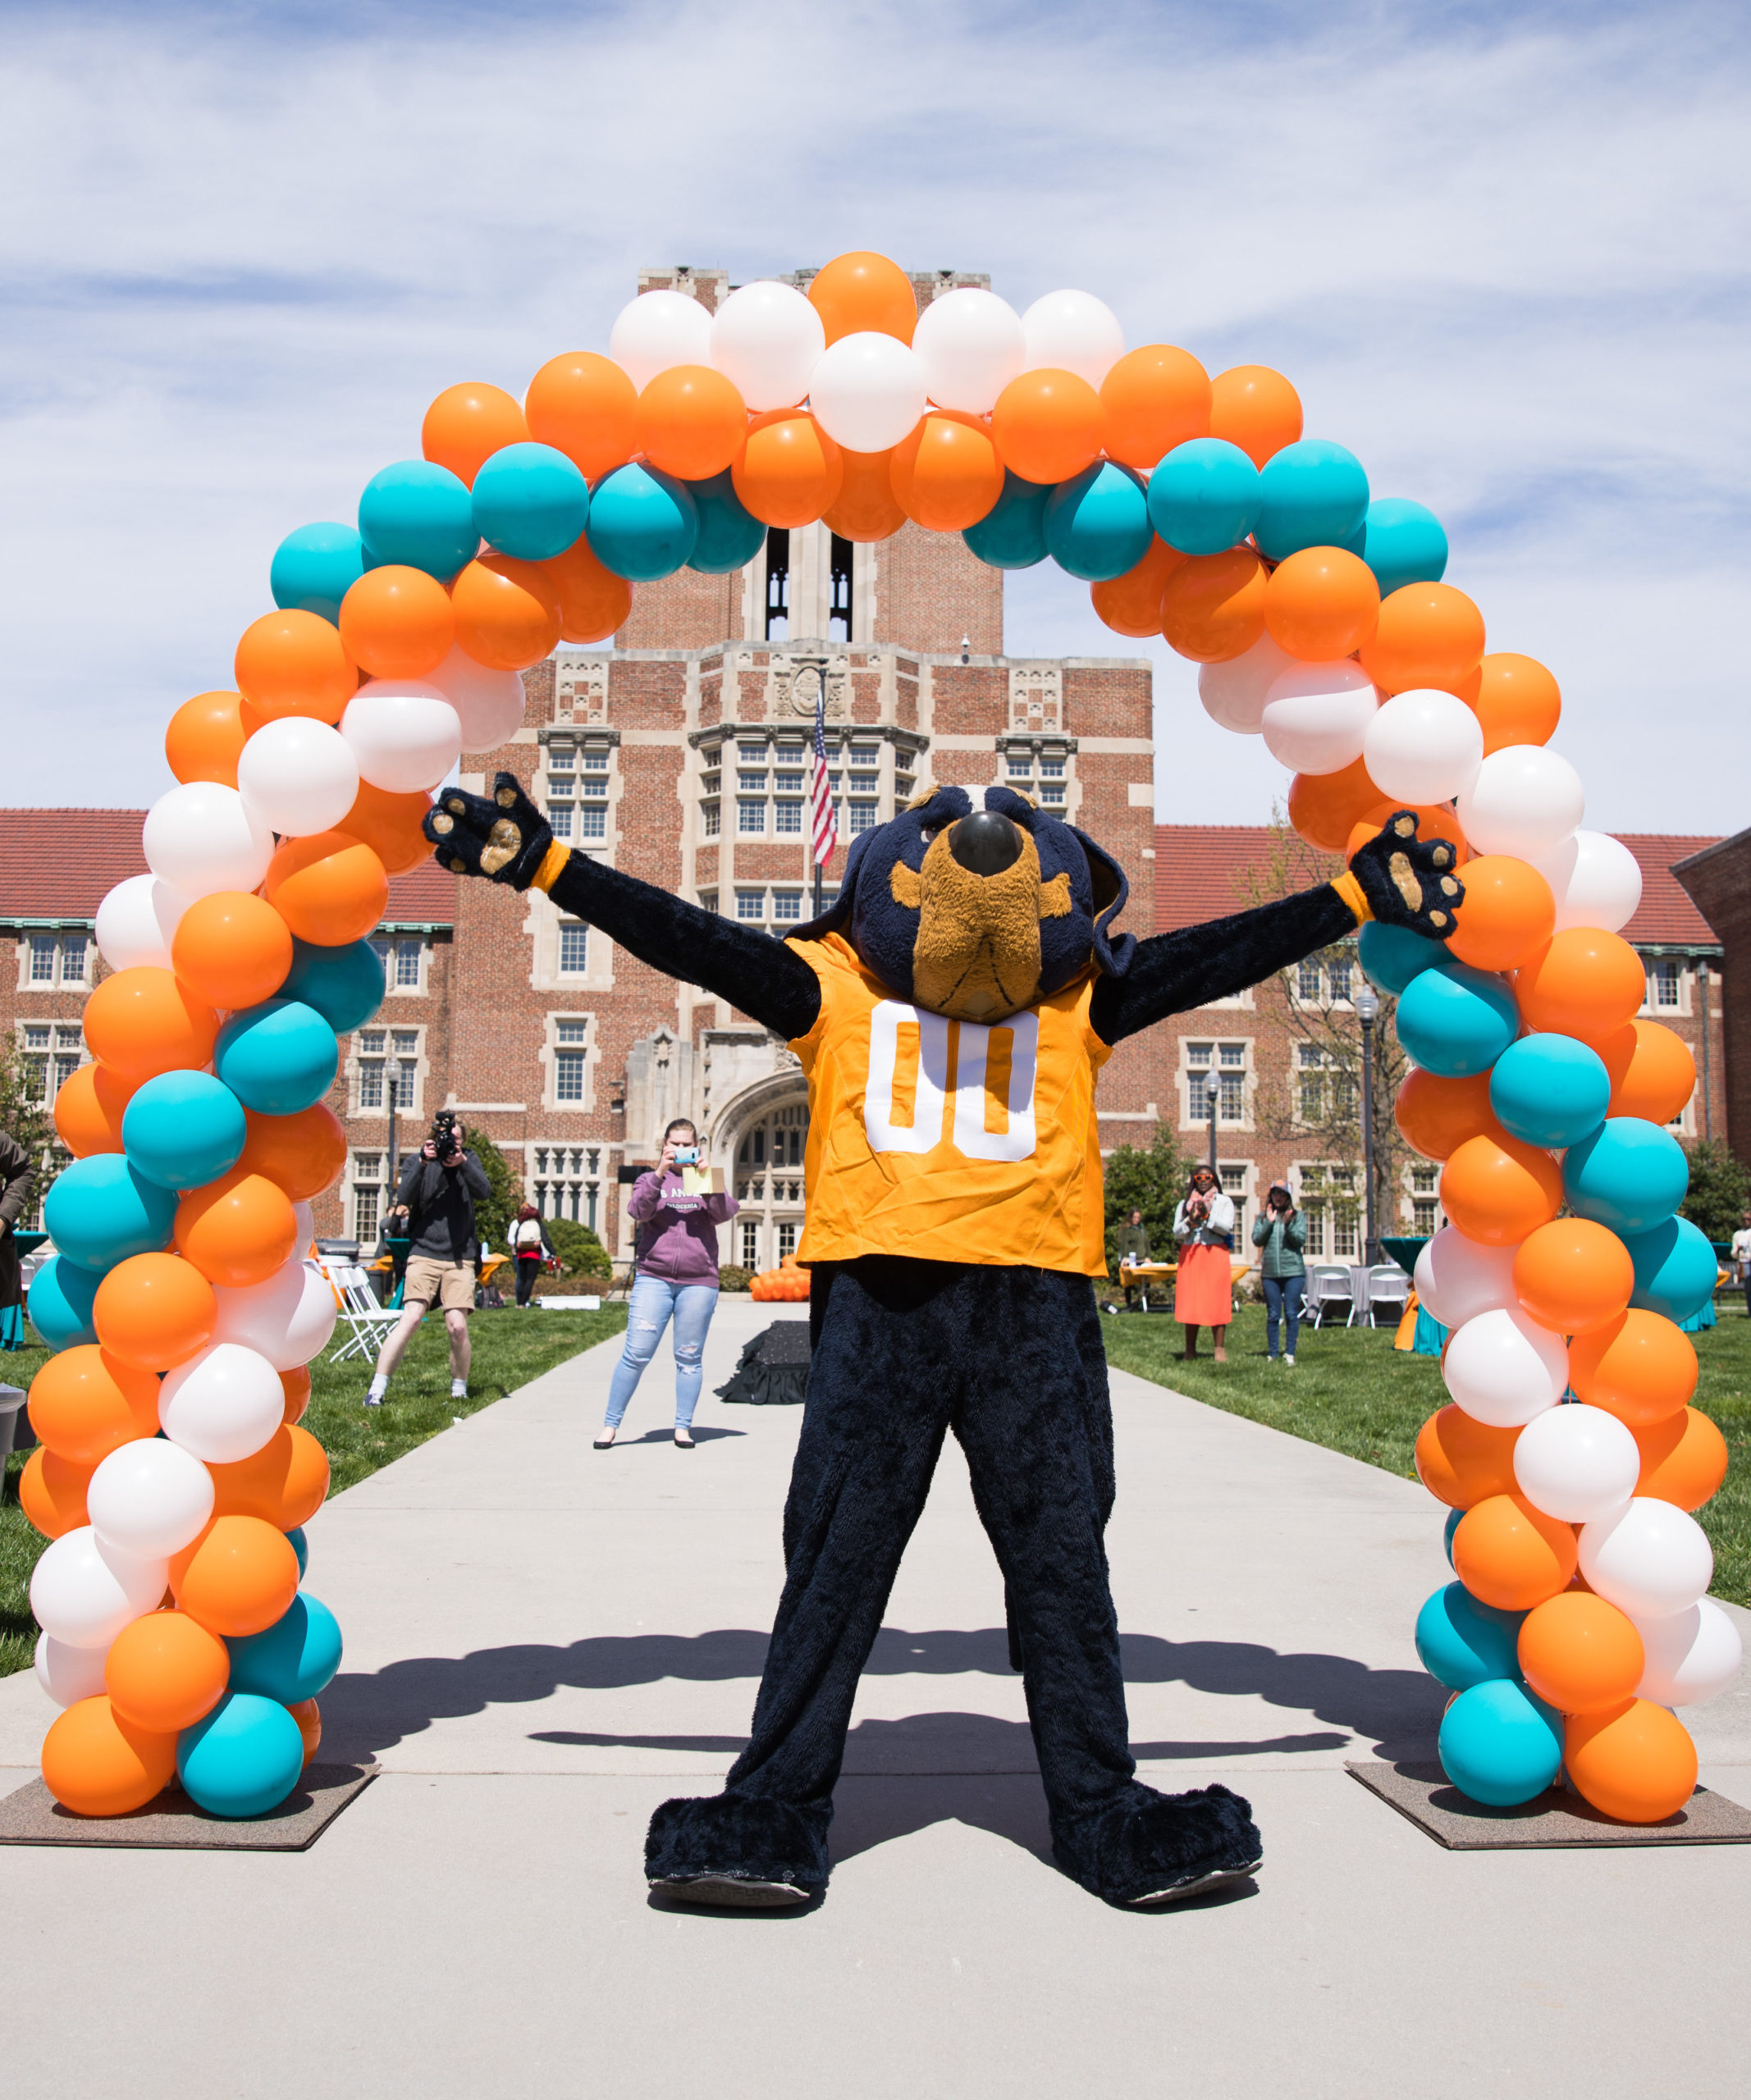 Smokey standing in front of a building with orange, blue and white balloons 